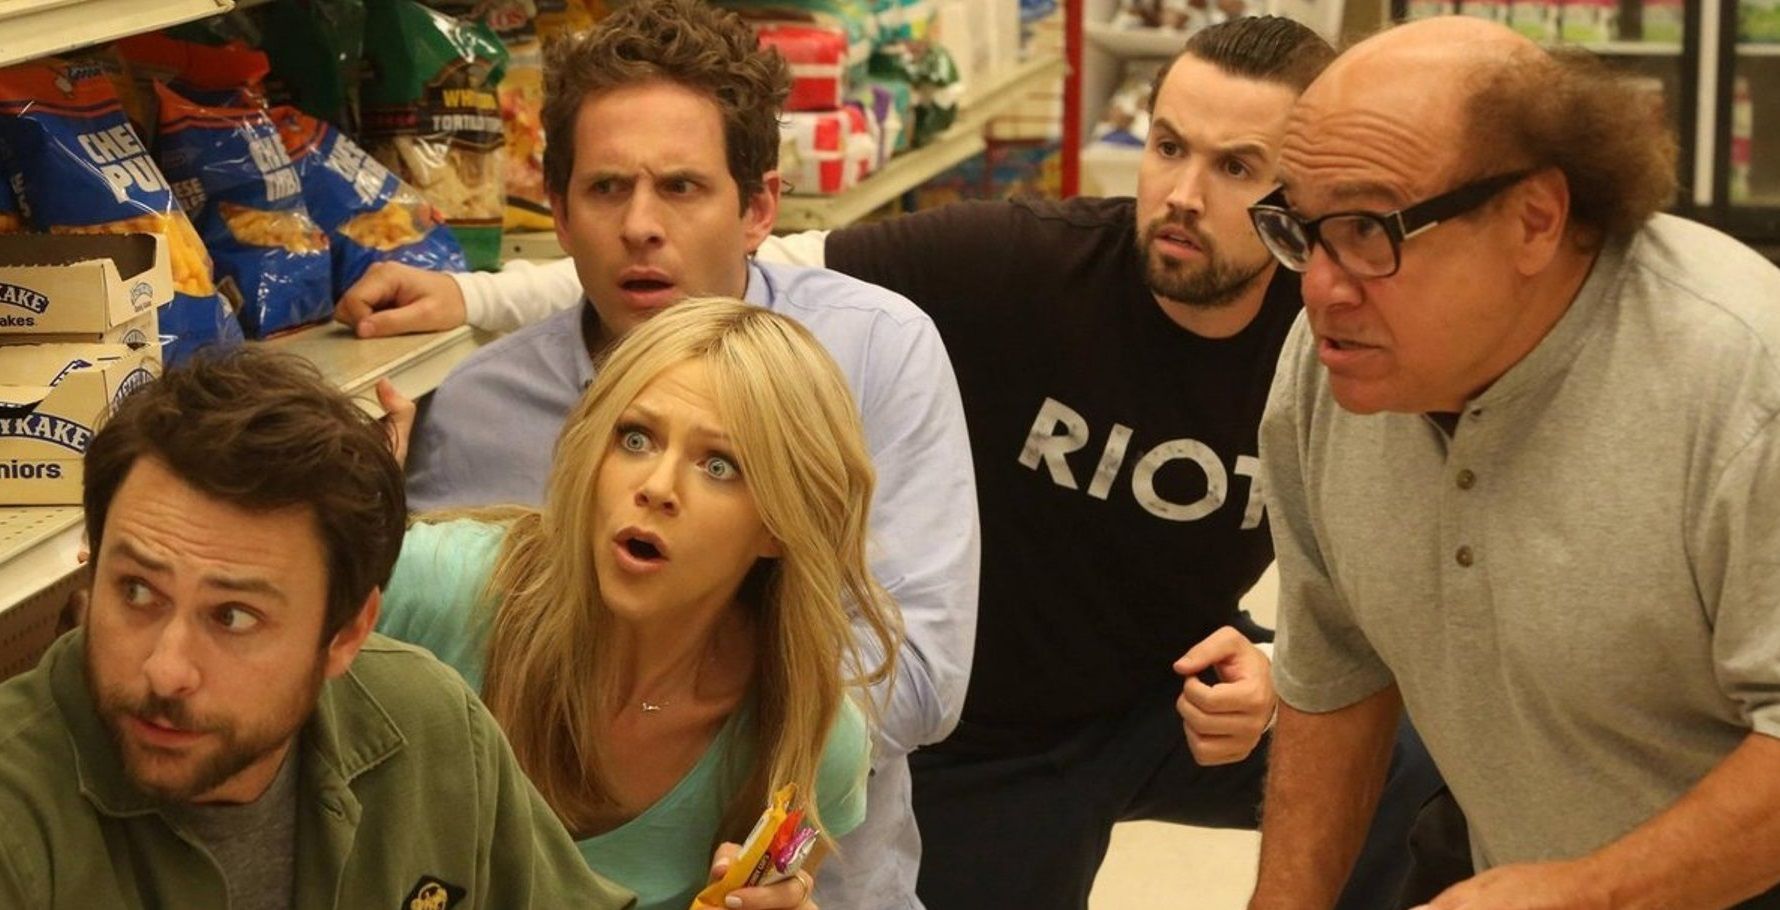 15 Shows To Watch If You Like It's Always Sunny In Philadelphia